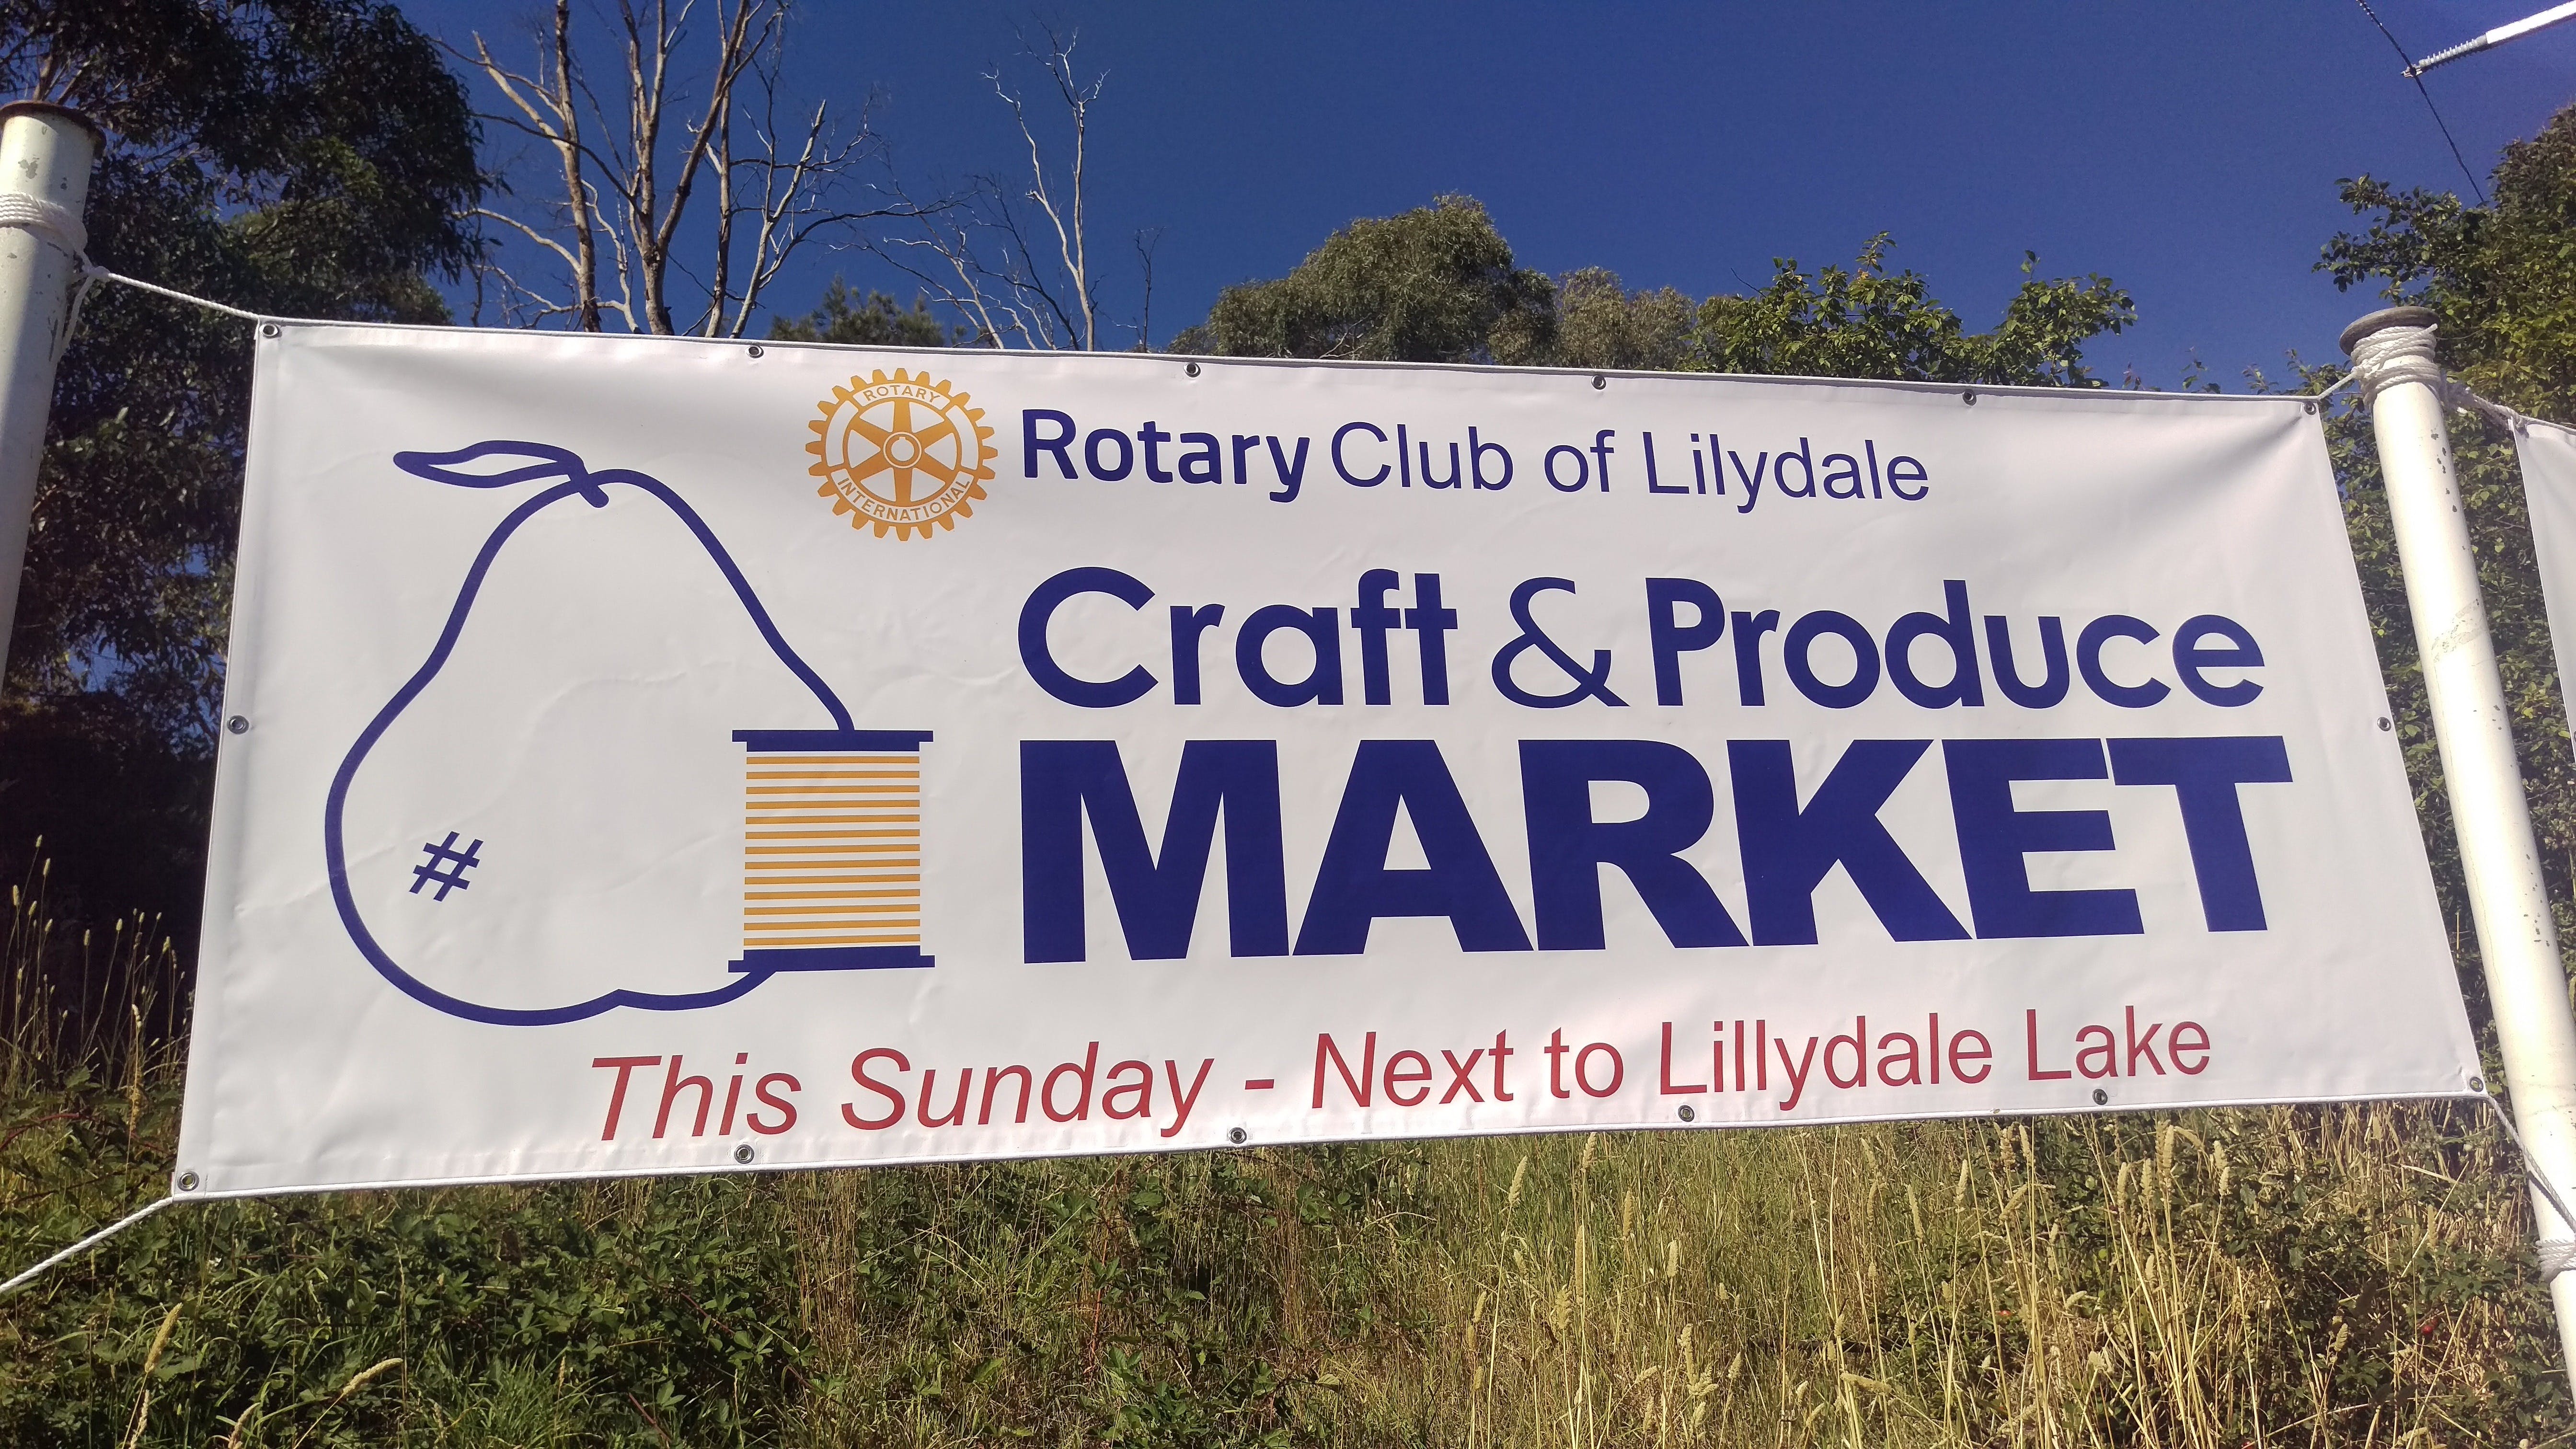 Rotary Club of Lilydale Craft and Produce Market - Kingaroy Accommodation